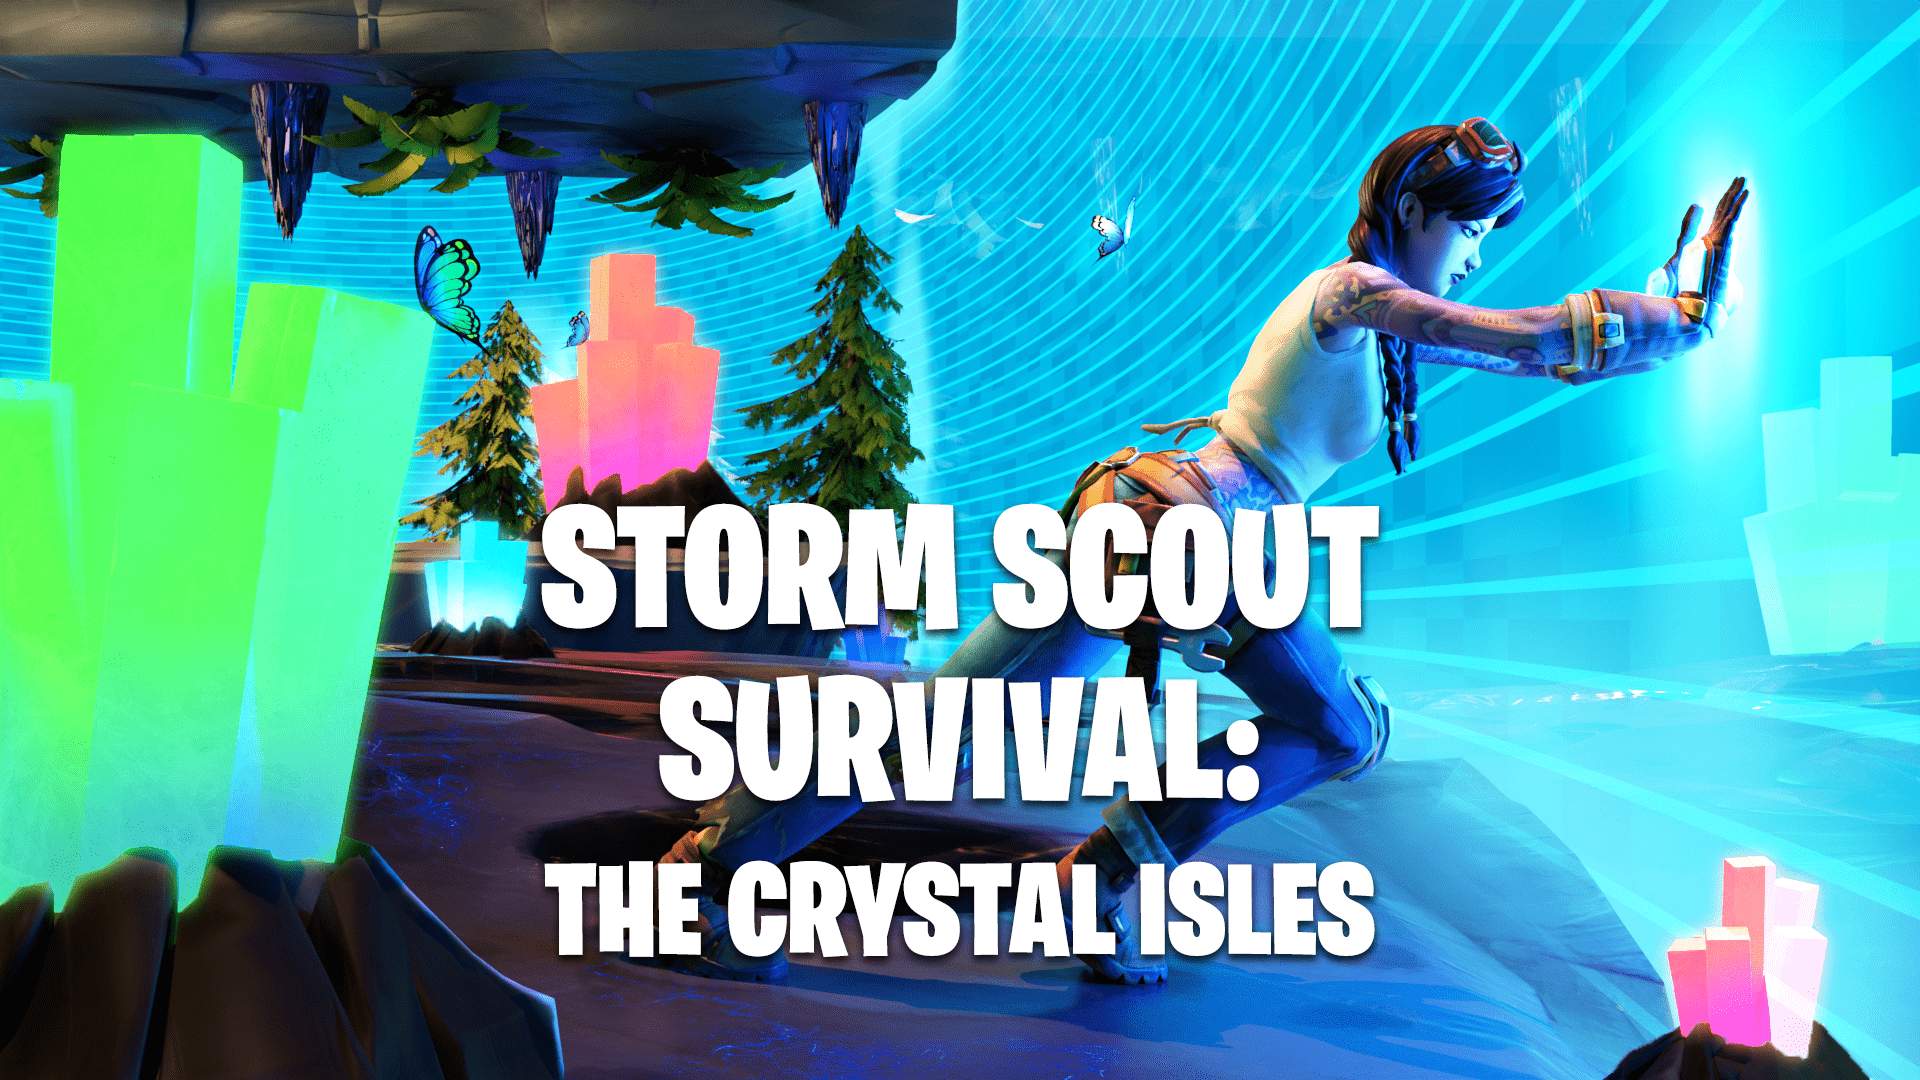 STORM SCOUT SURVIVAL: CRYSTAL ISLES image 2